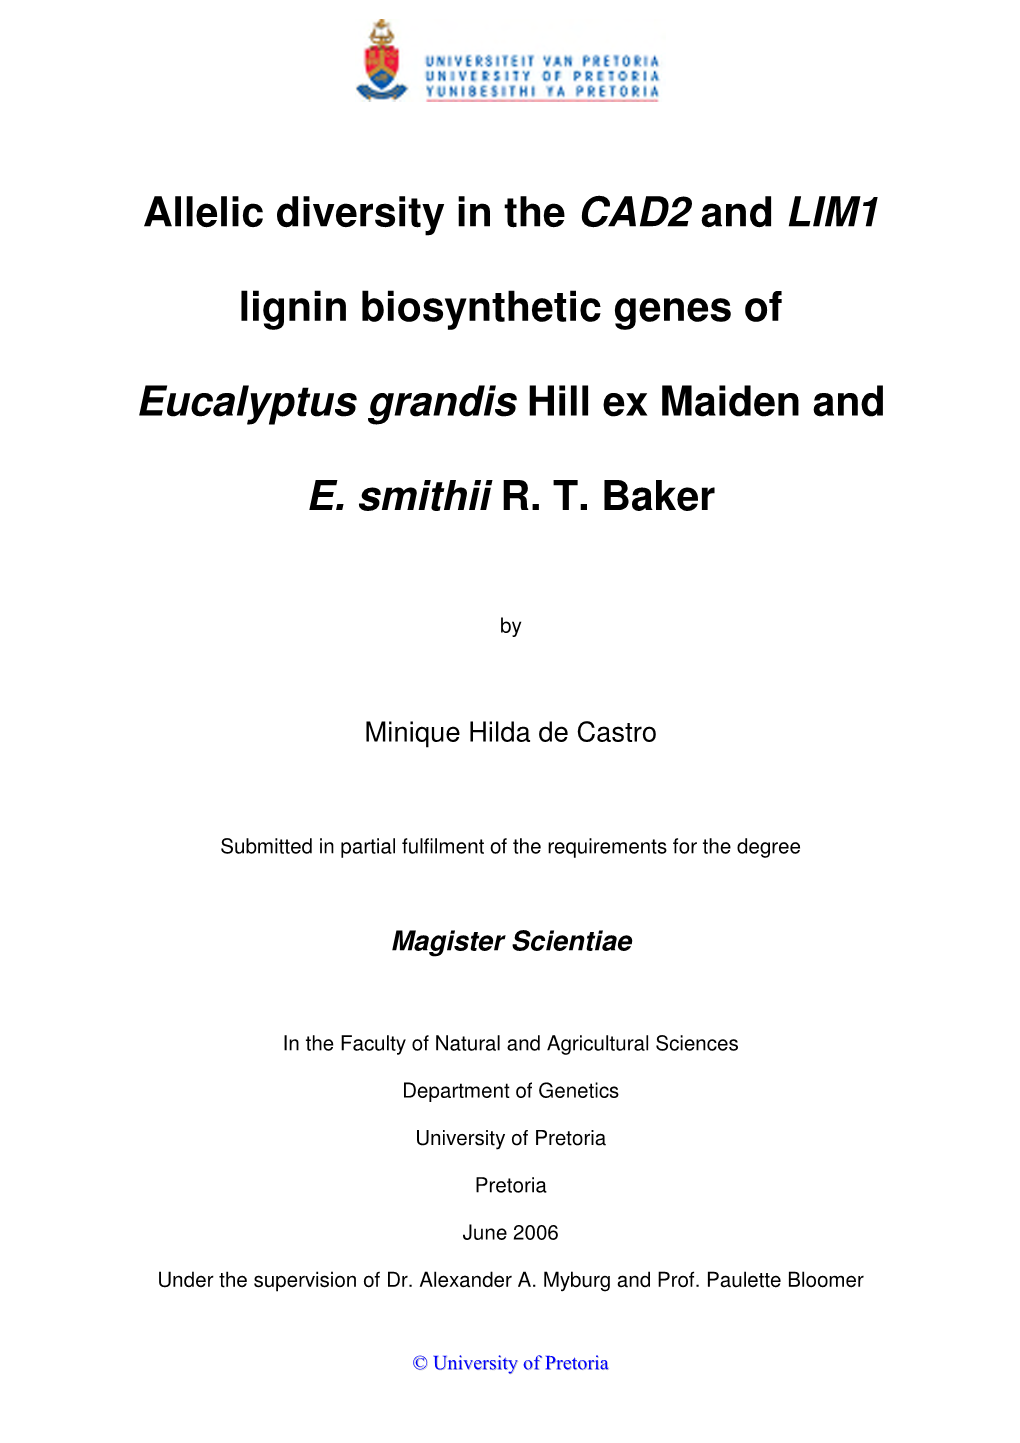 Allelic Diversity in the CAD2 and LIM1 Lignin Biosynthetic Genes Of